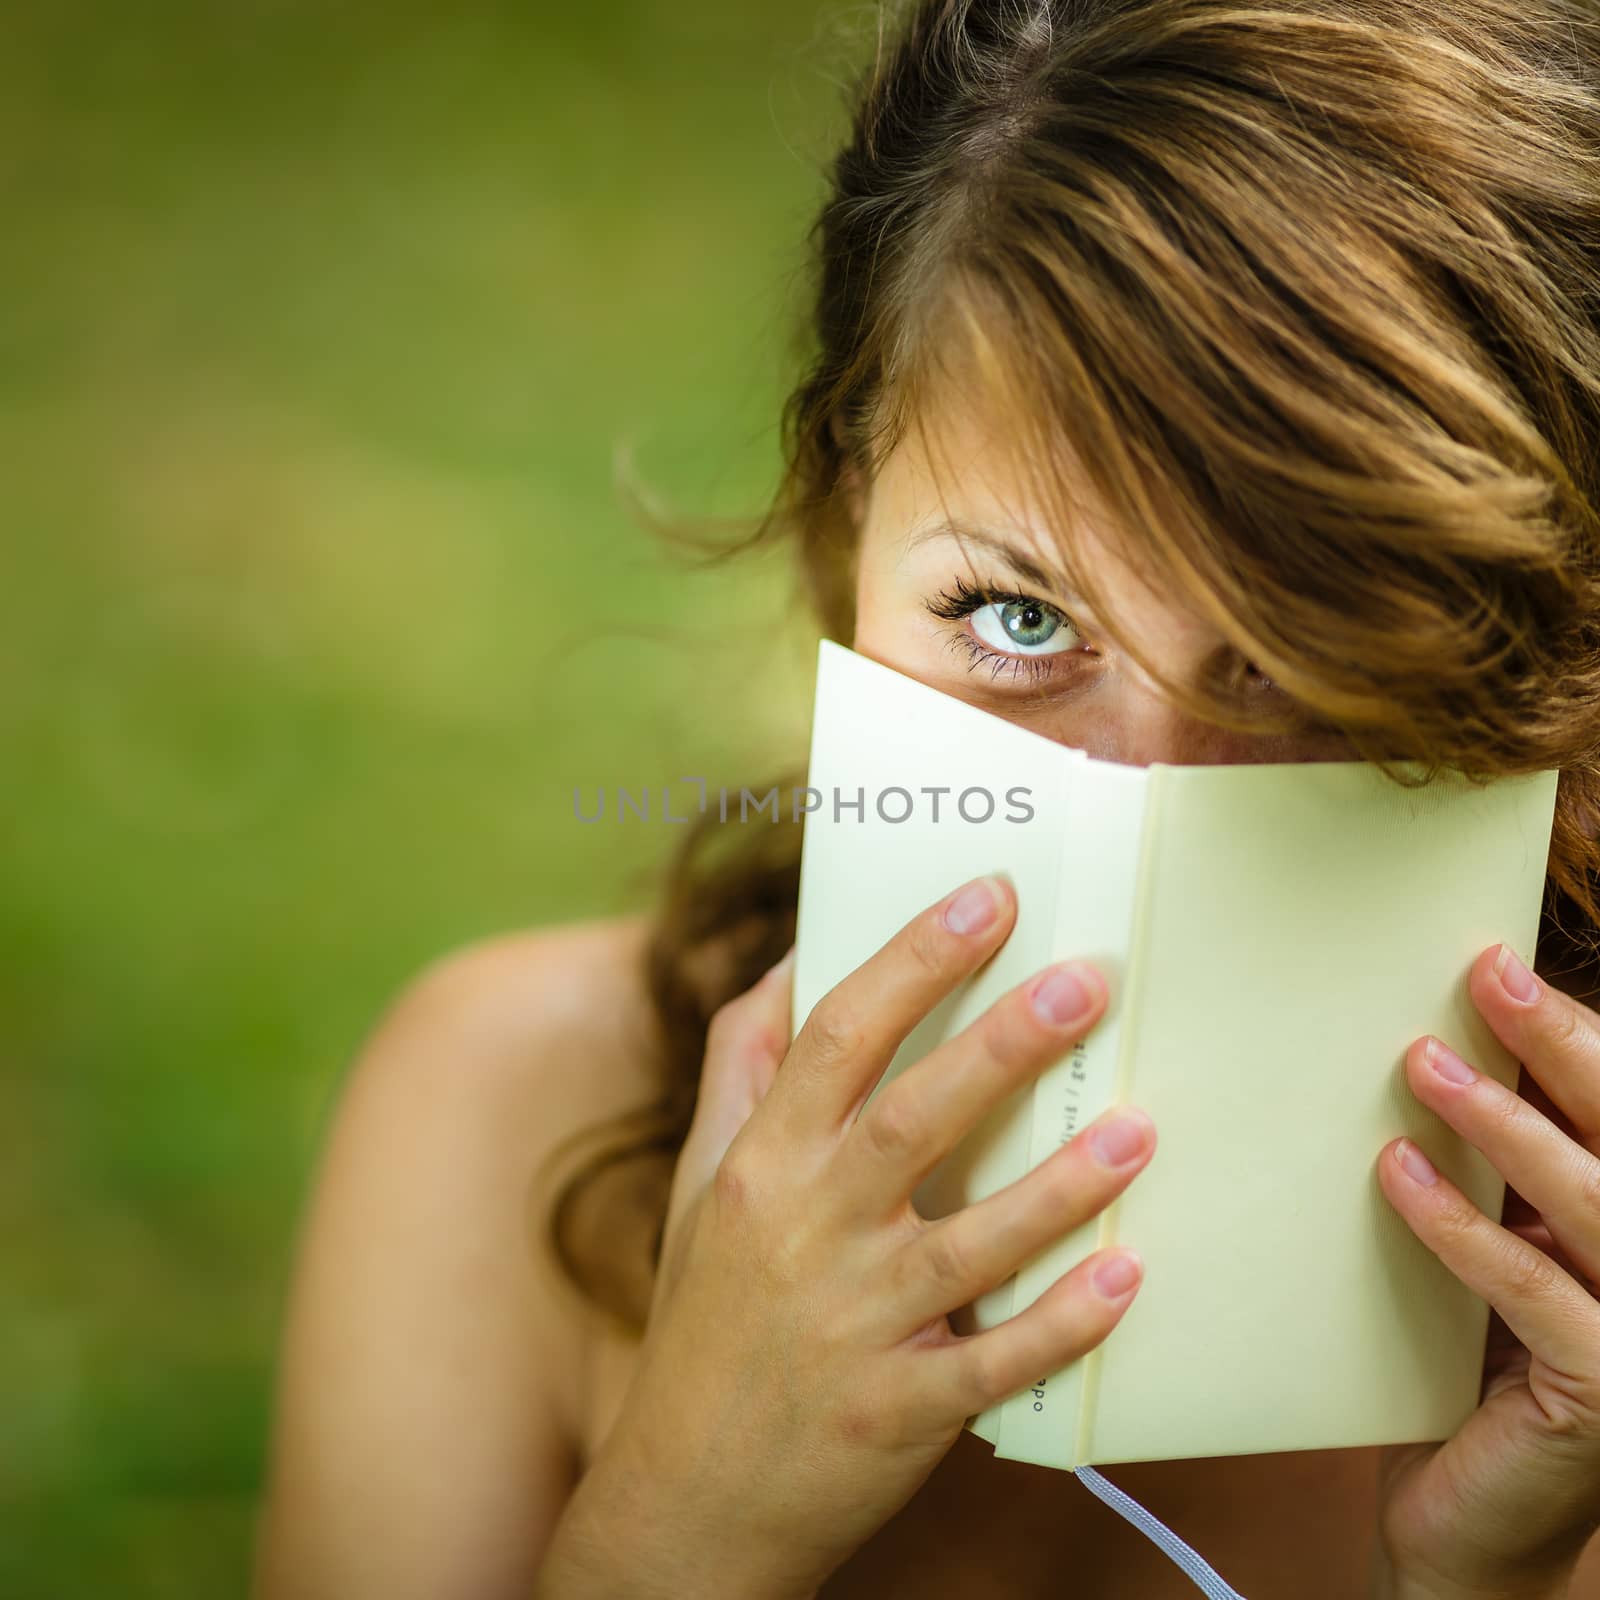 Cute young woman  covering her face with a book she is reading